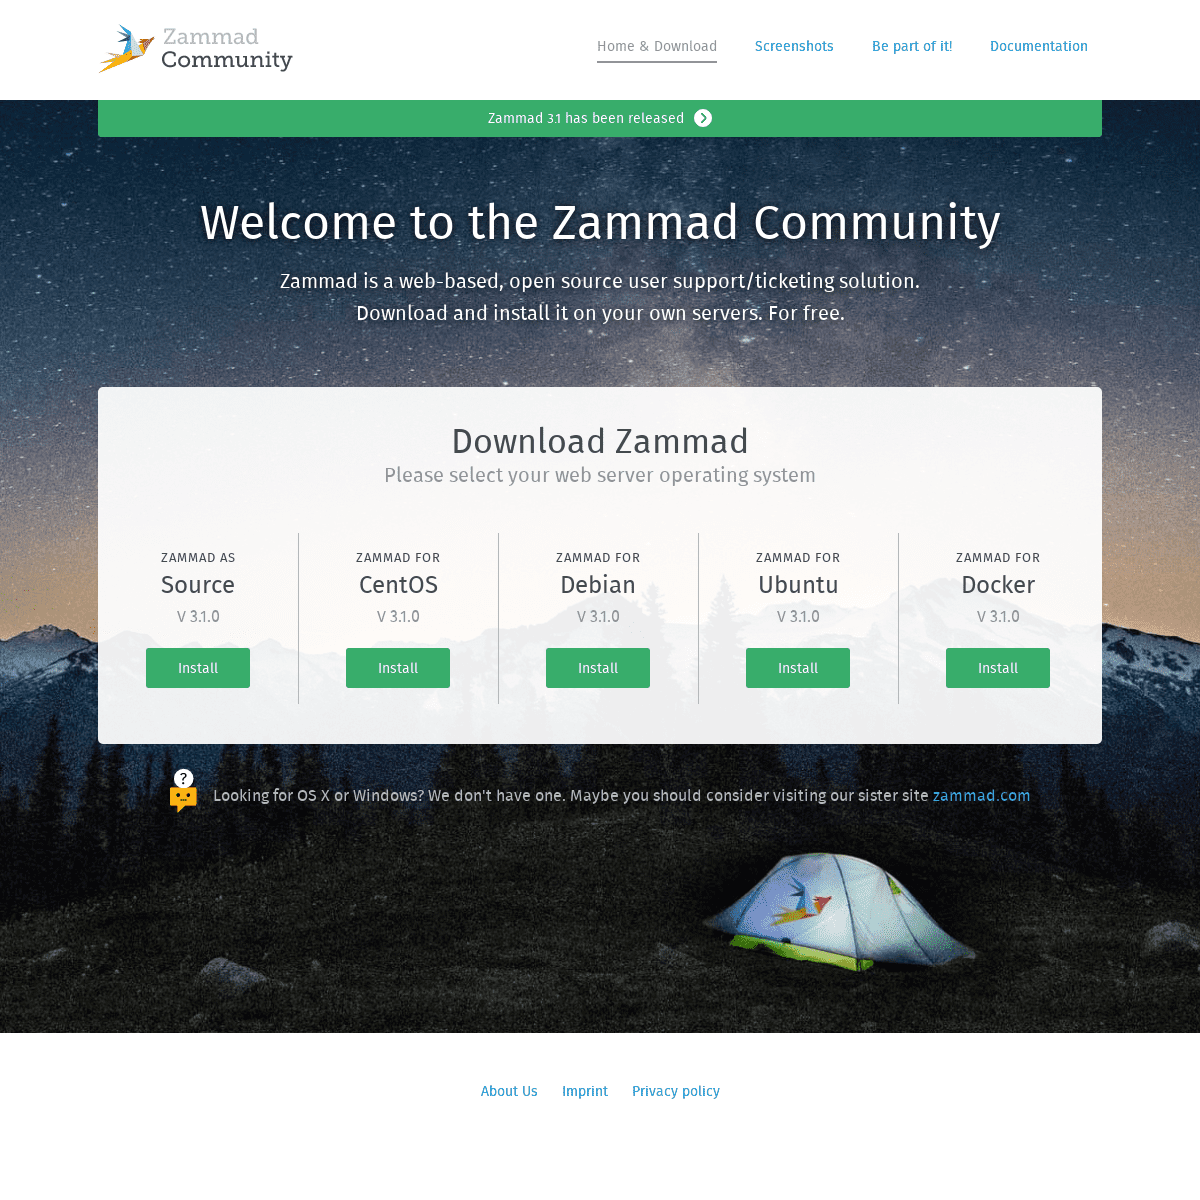 A complete backup of zammad.org